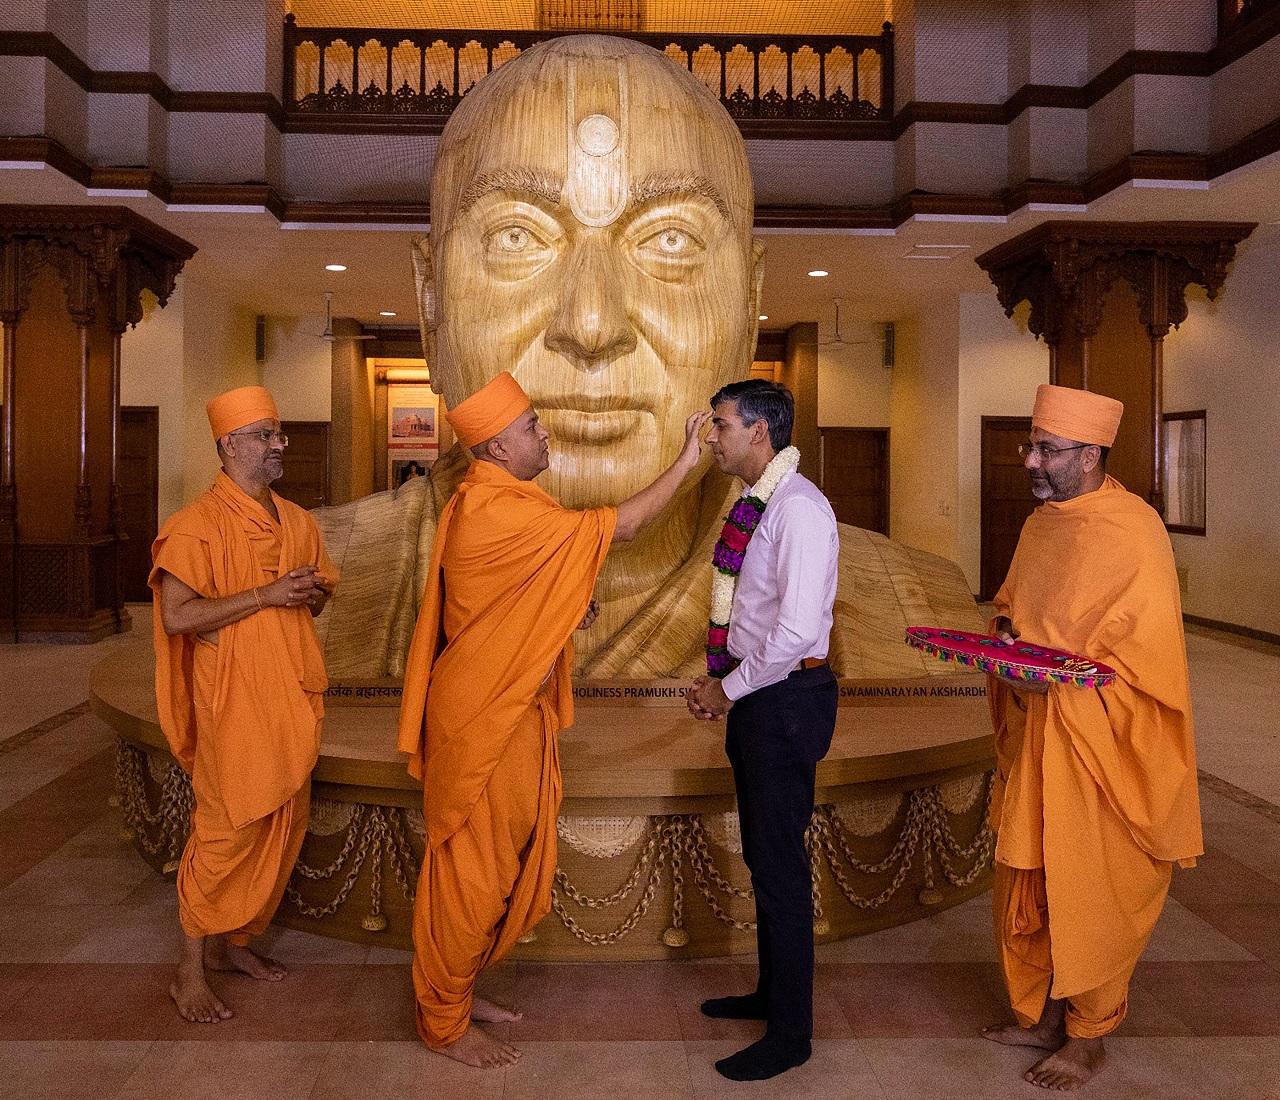 They reached the temple dedicated to Swaminarayan, believed to be an incarnation of Lord Vishnu, early morning and walked barefoot from the reception area to the main temple complex -- a distance of about 150 metres